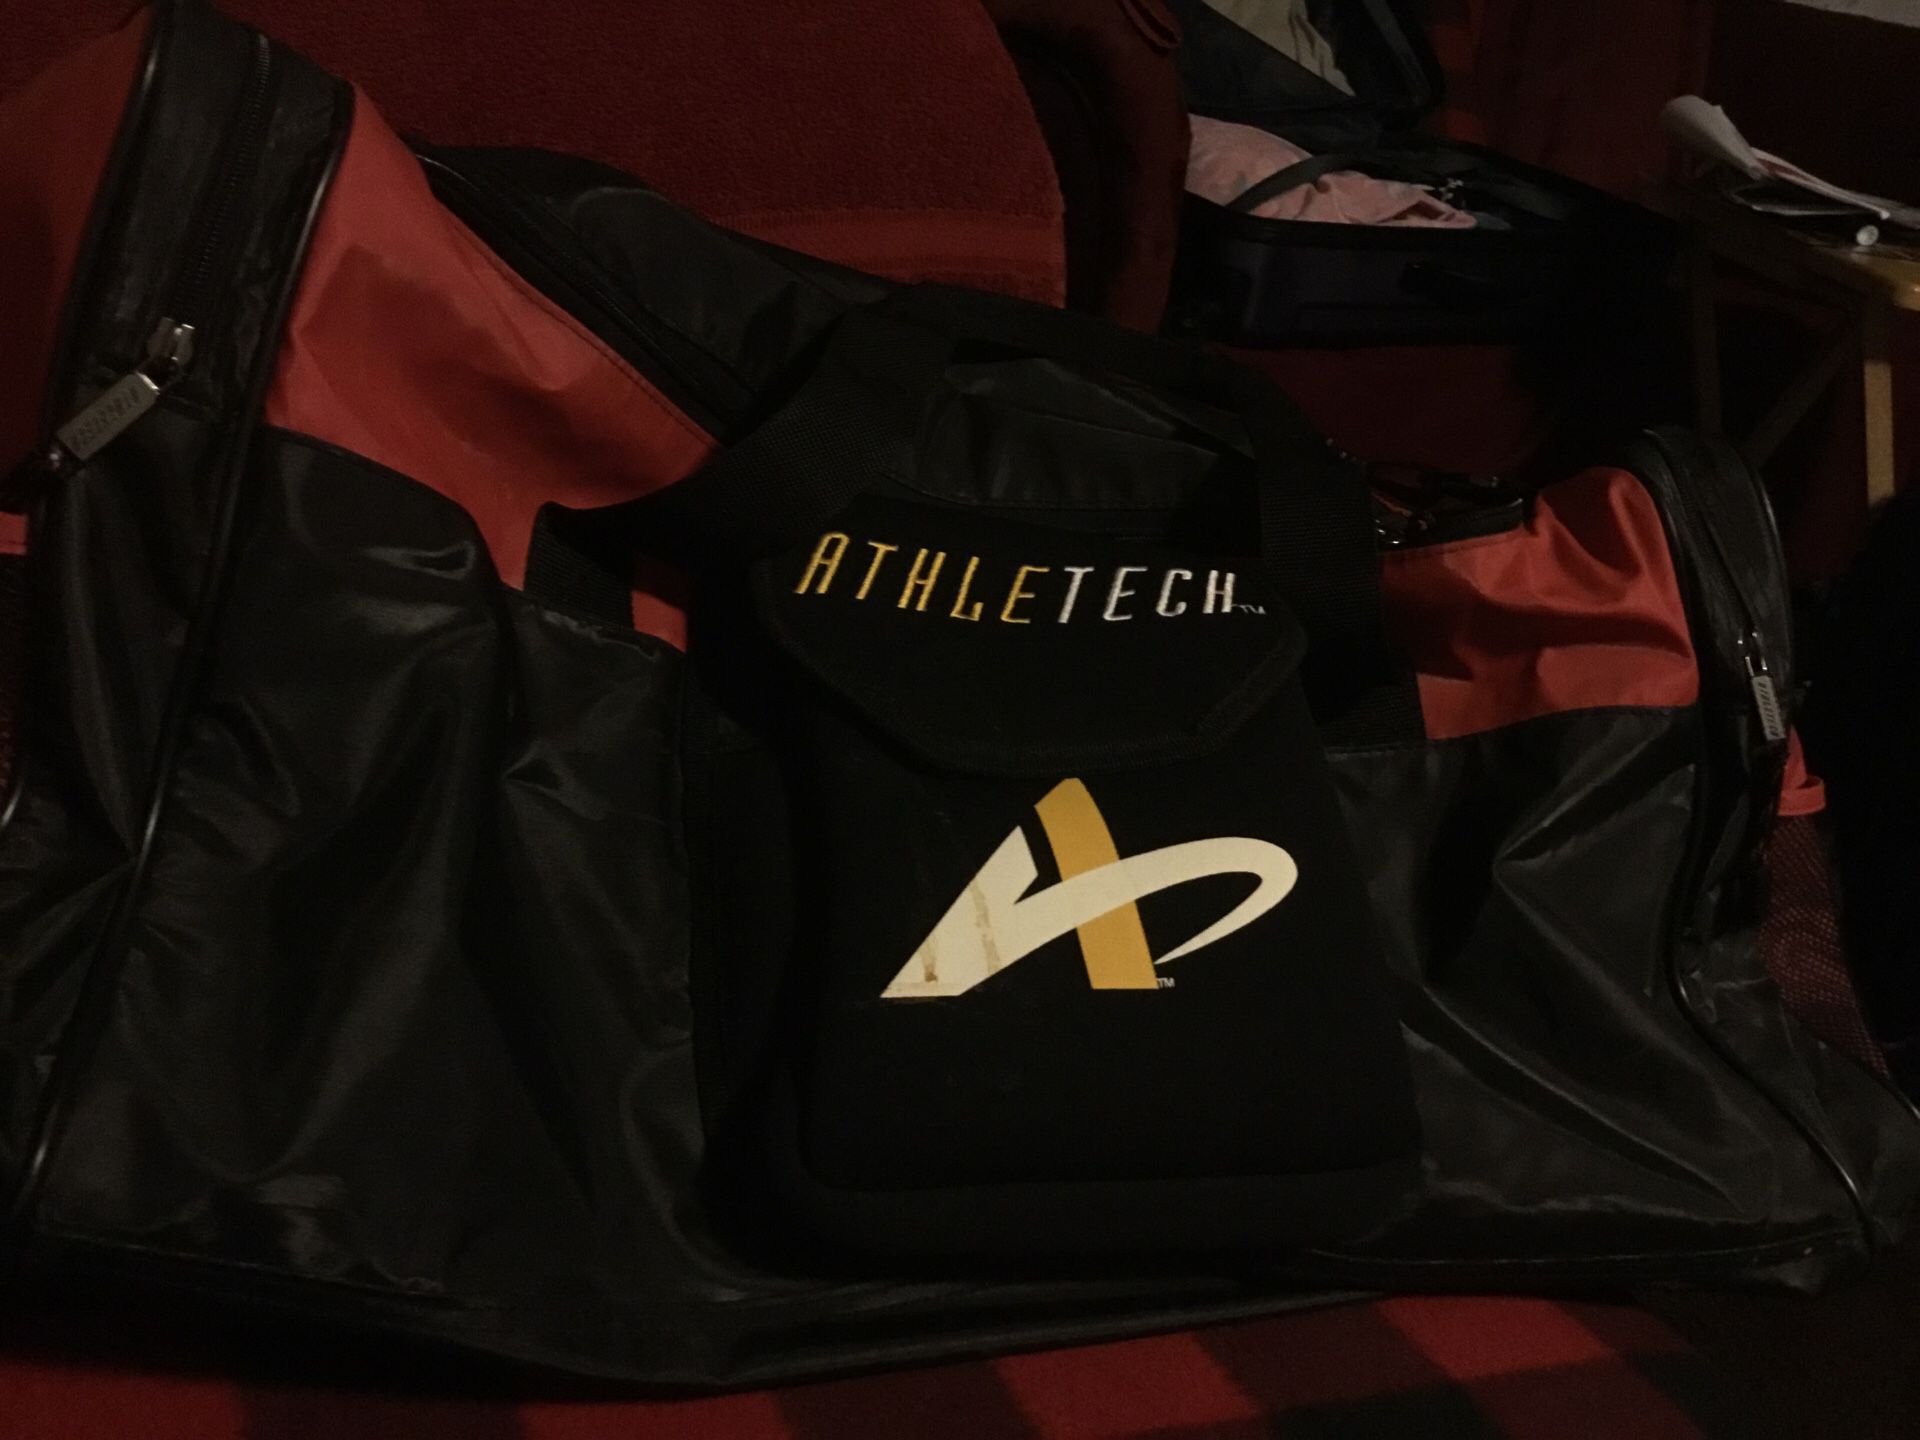 A red and black duffer bag brand name is athlete he